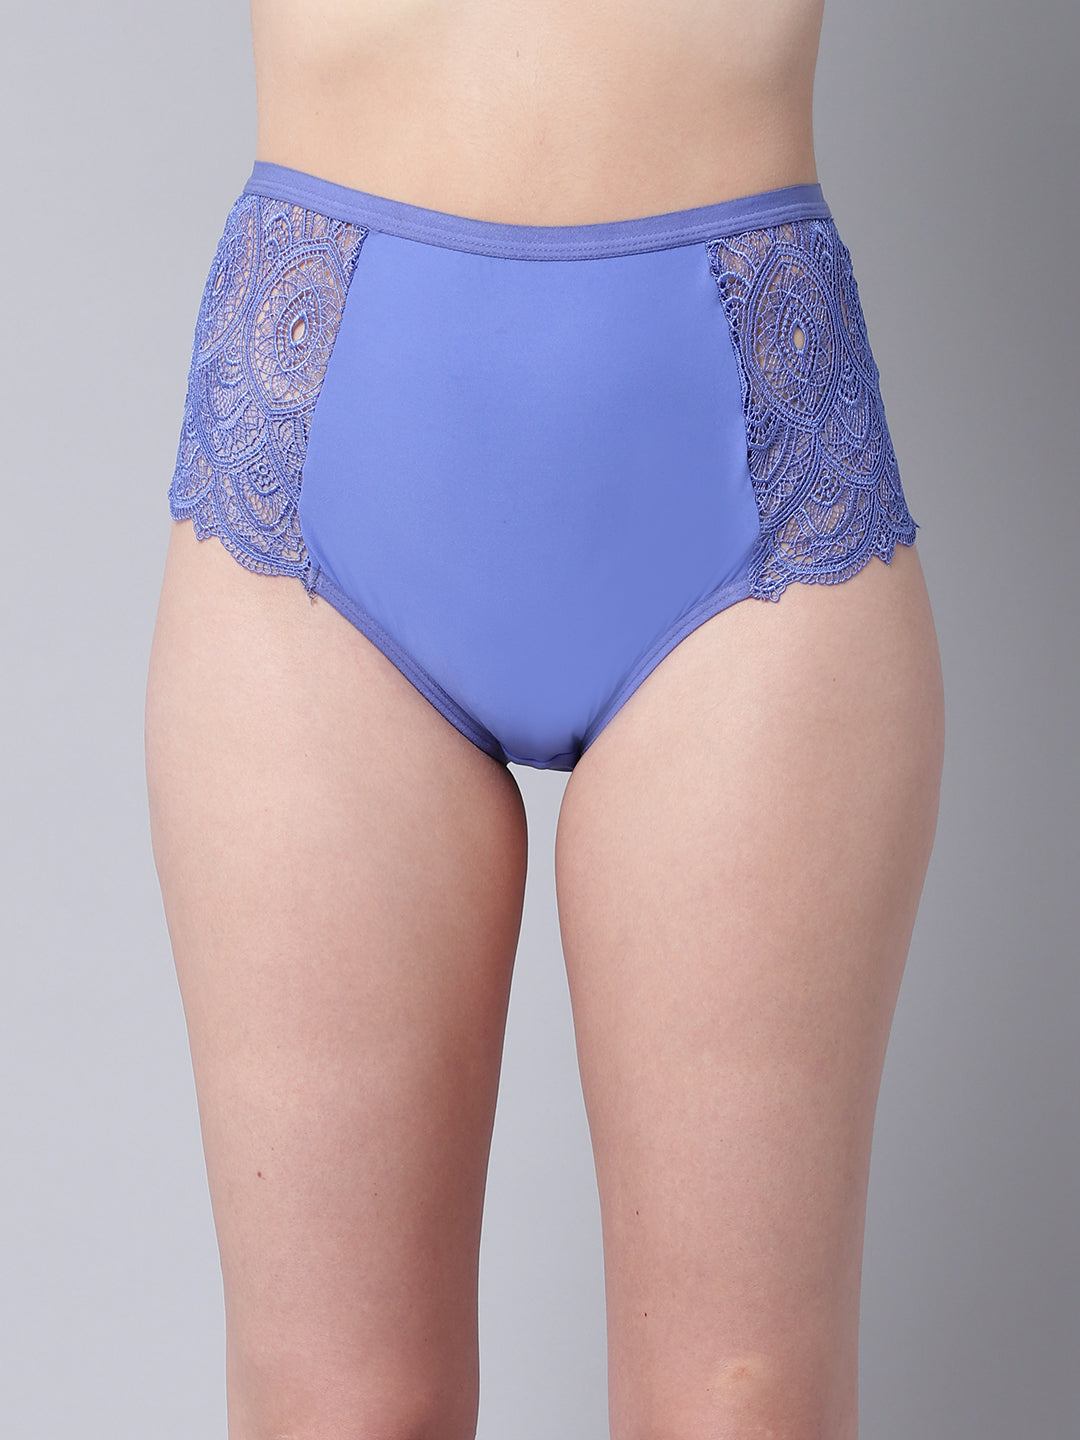 Blue lacy hipster panty